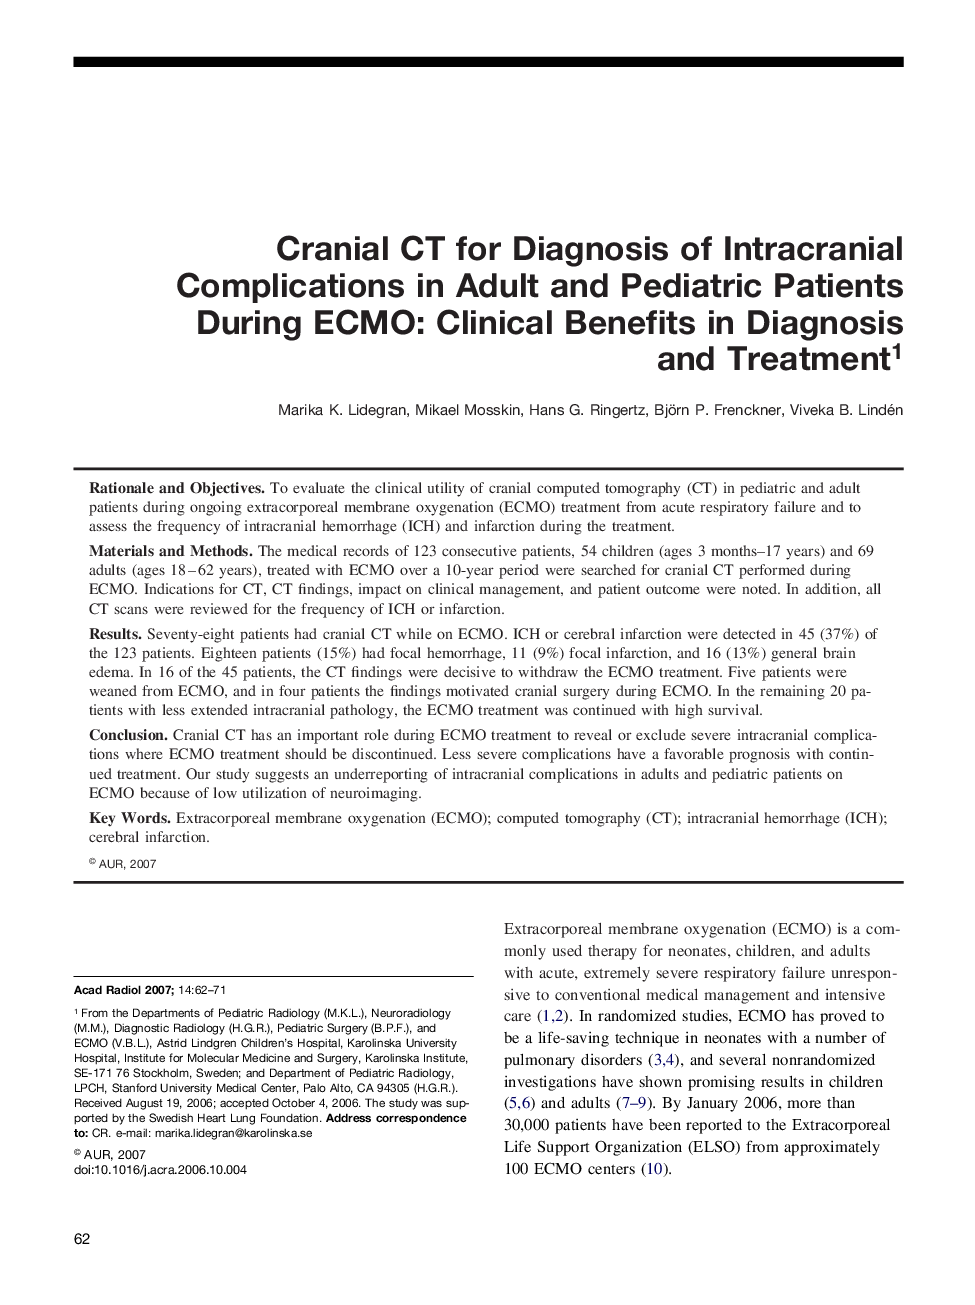 Cranial CT for Diagnosis of Intracranial Complications in Adult and Pediatric Patients During ECMO: Clinical Benefits in Diagnosis and Treatment